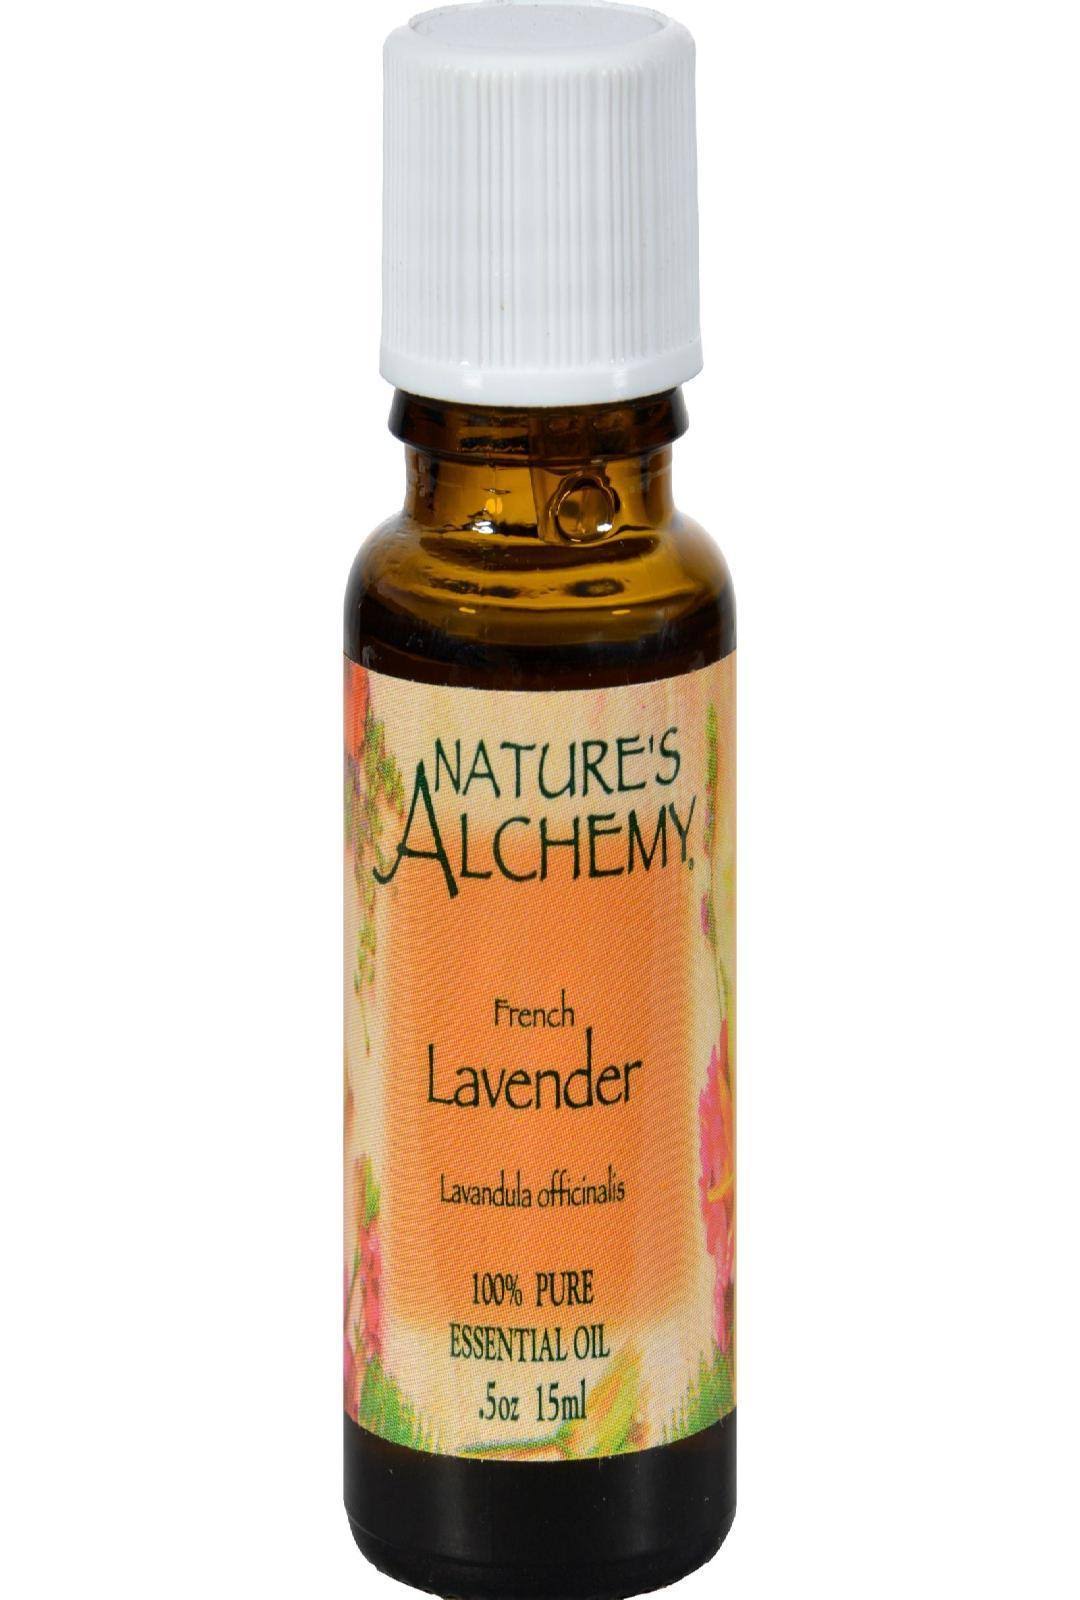 Nature's Alchemy 100% Pure Essential Oil - French Lavender, 15ml